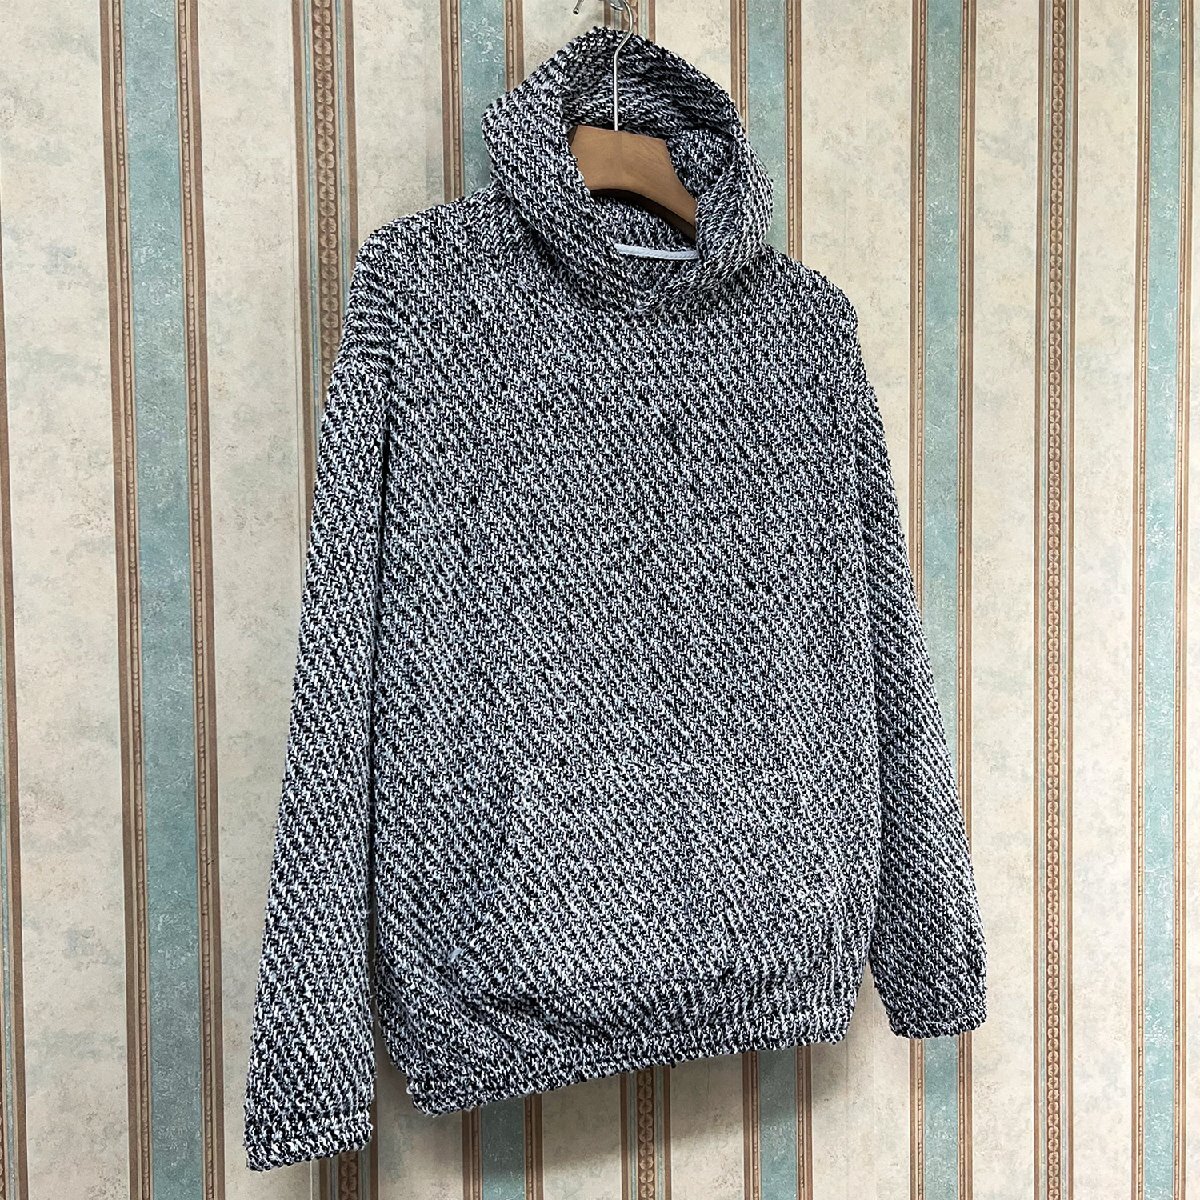  high class regular price 4 ten thousand FRANKLIN MUSK* America * New York departure Parker fine quality wool soft robust braided piece . tops pull over spring size 4